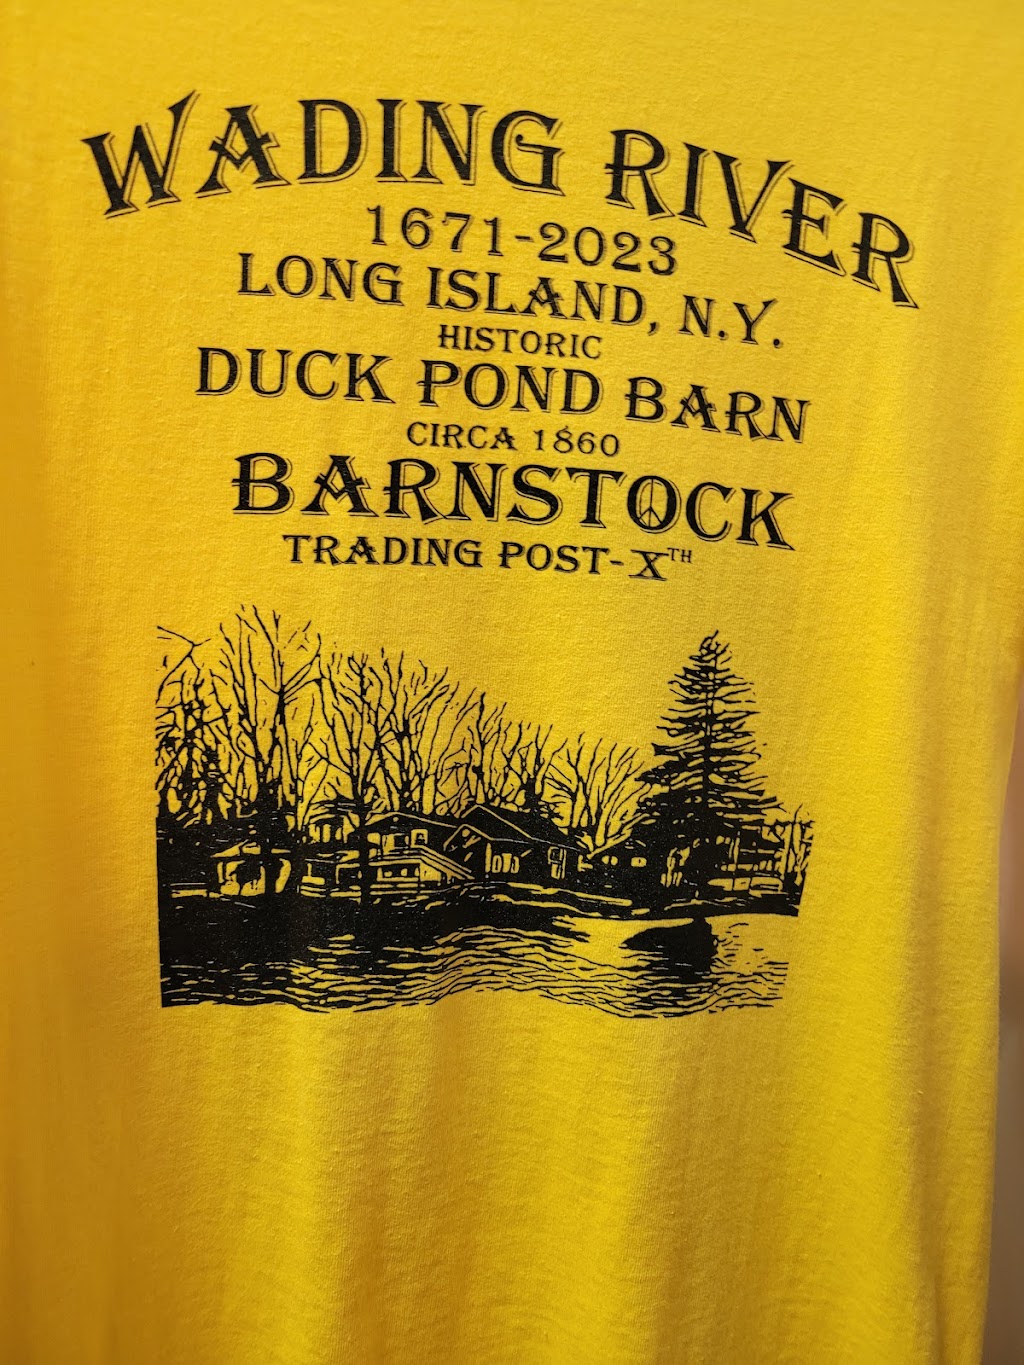 The Barn of Wading River | 302 N Country Rd, Wading River, NY 11792 | Phone: (631) 886-2390